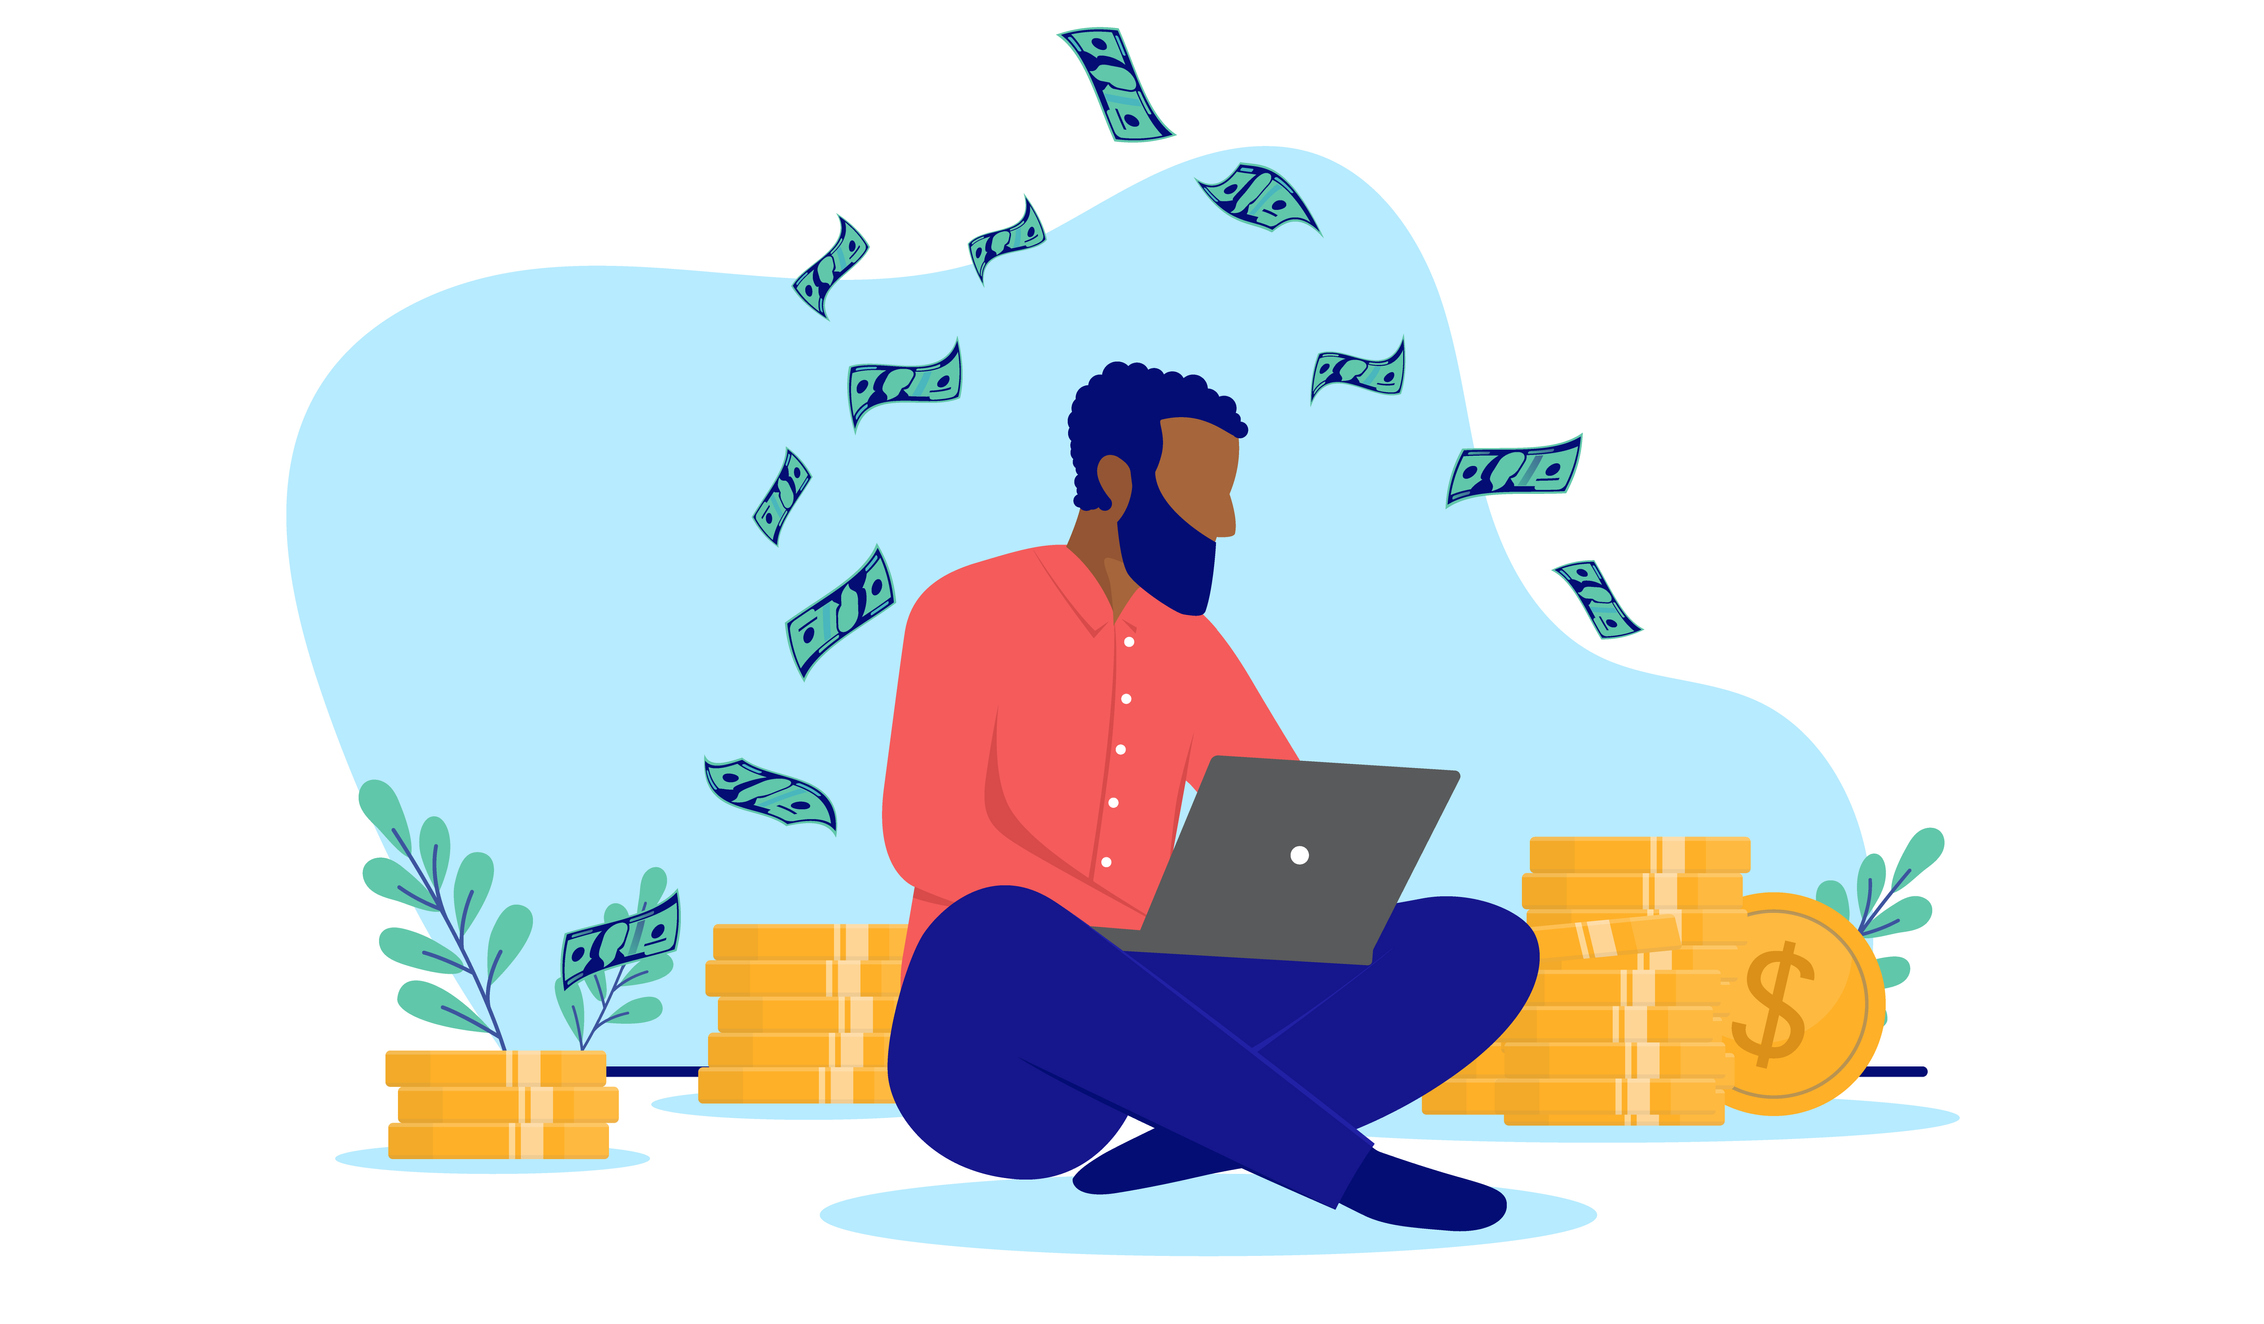 Black ethnic man sitting on floor with laptop earning income from internet.  Flat design vector illustration with white background